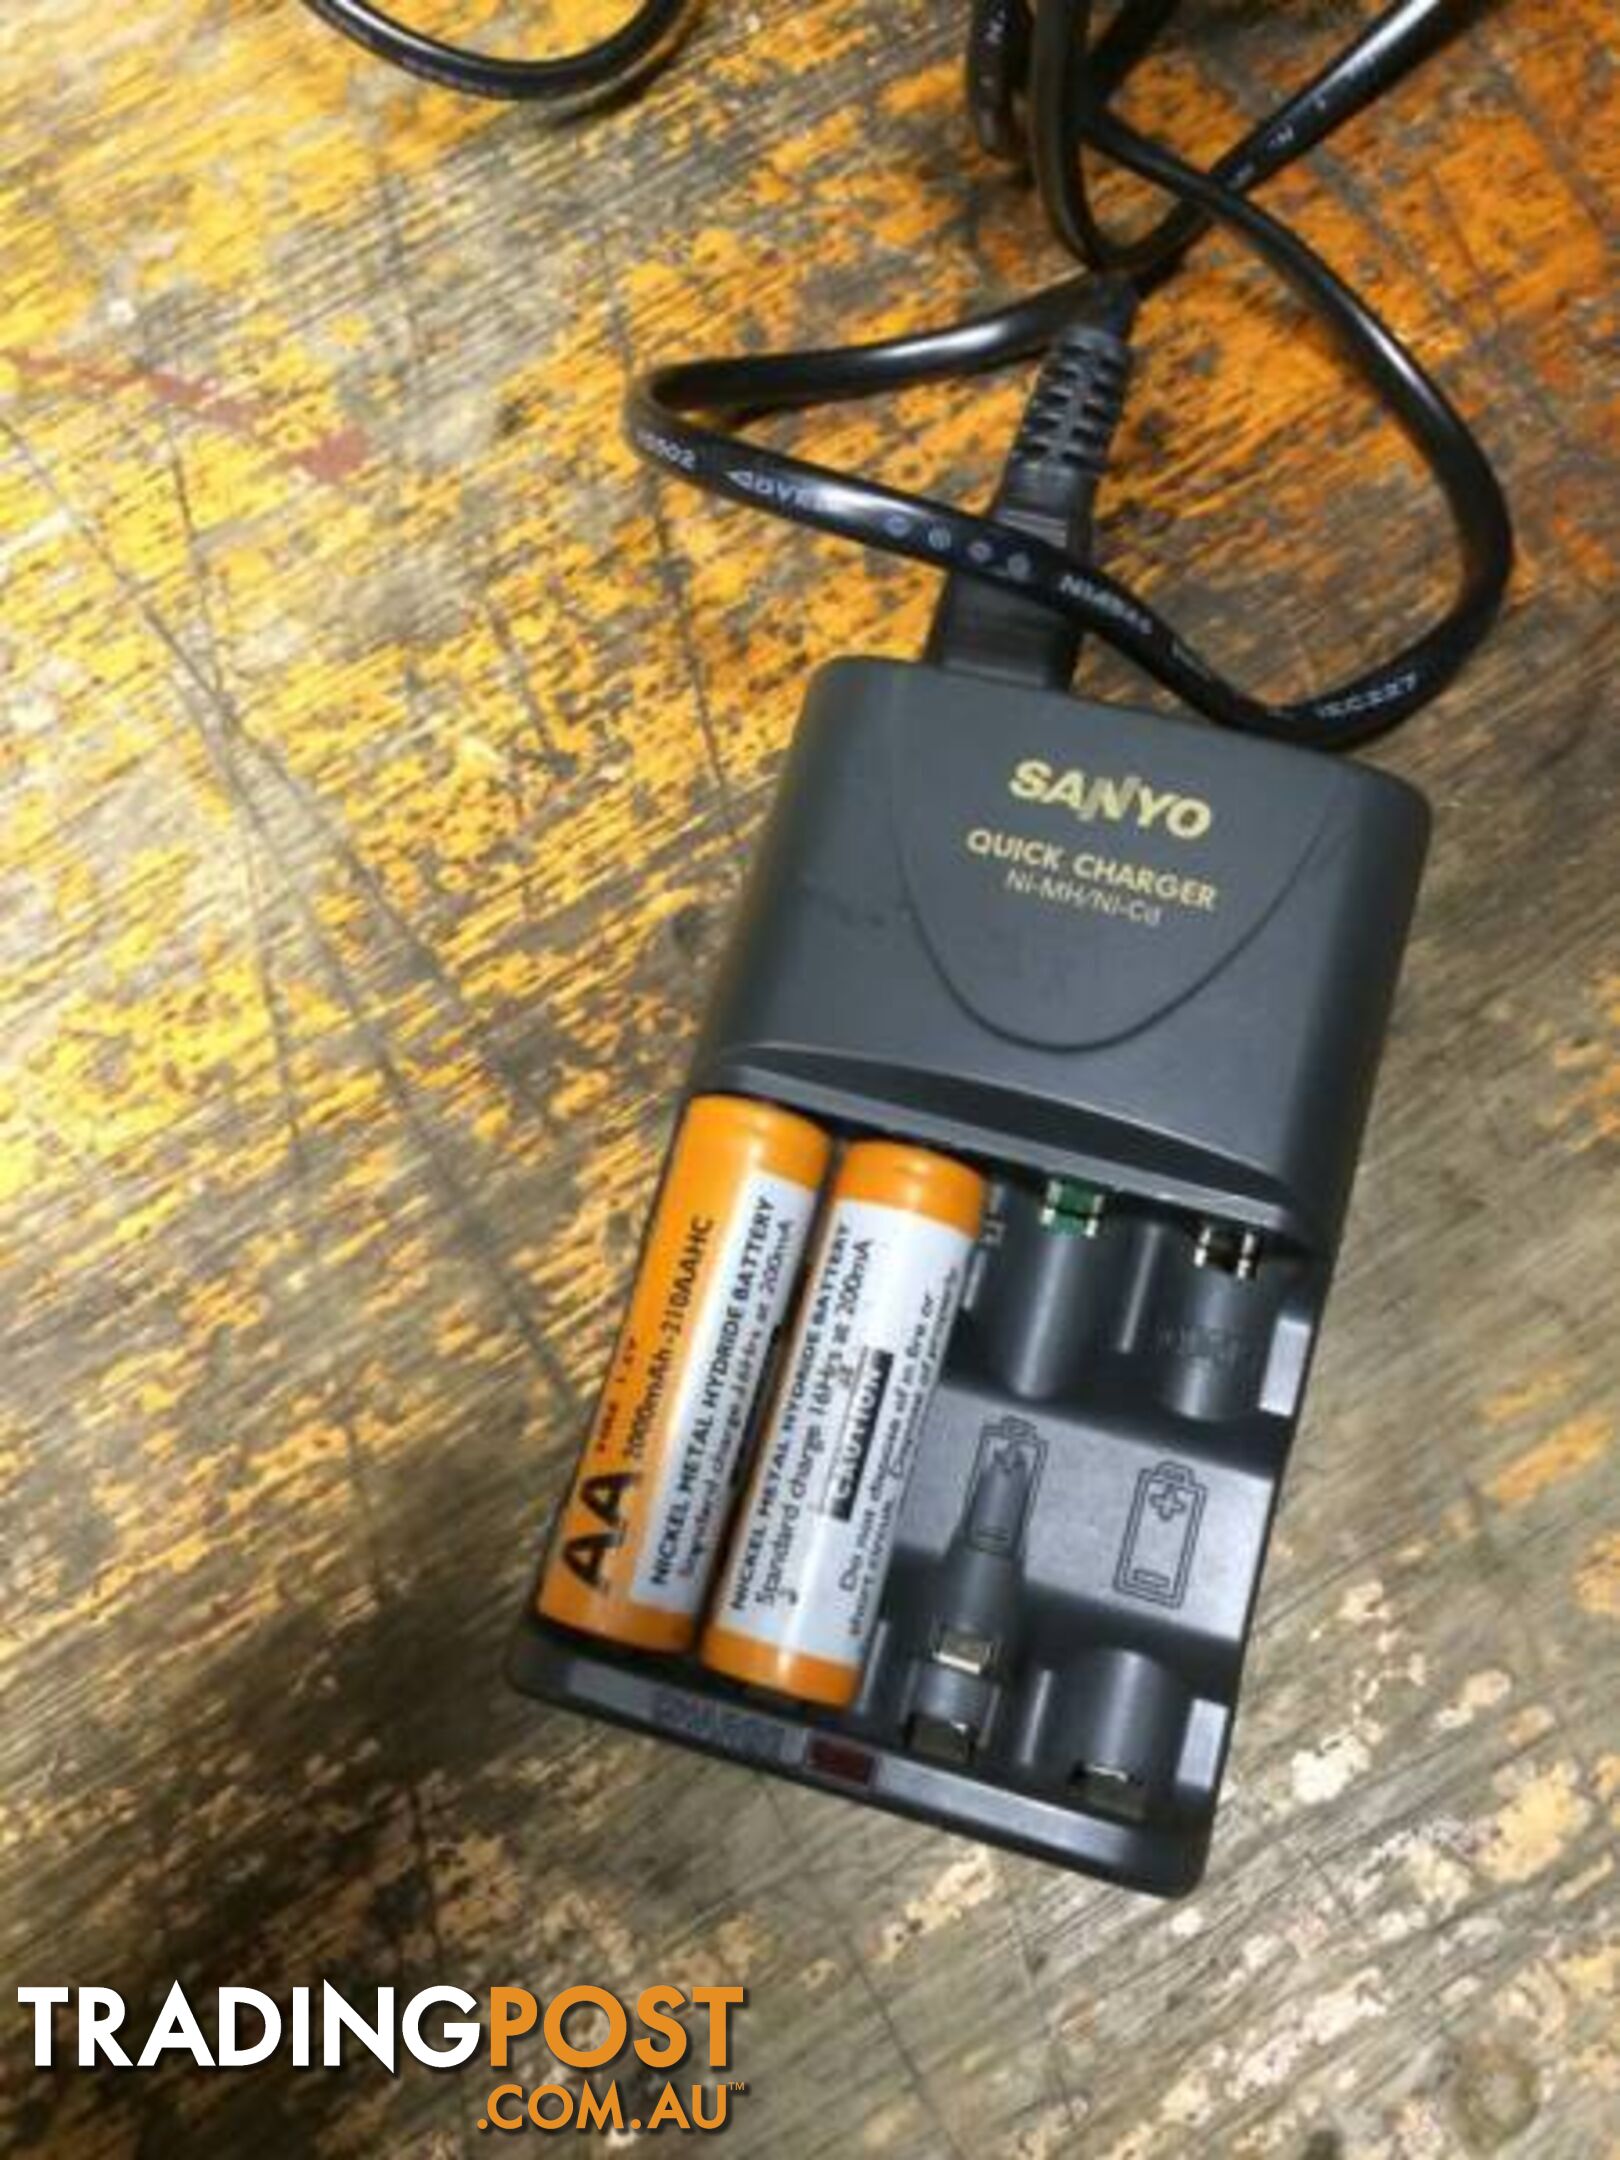 SANYO QUICK BATTERY CHARGER